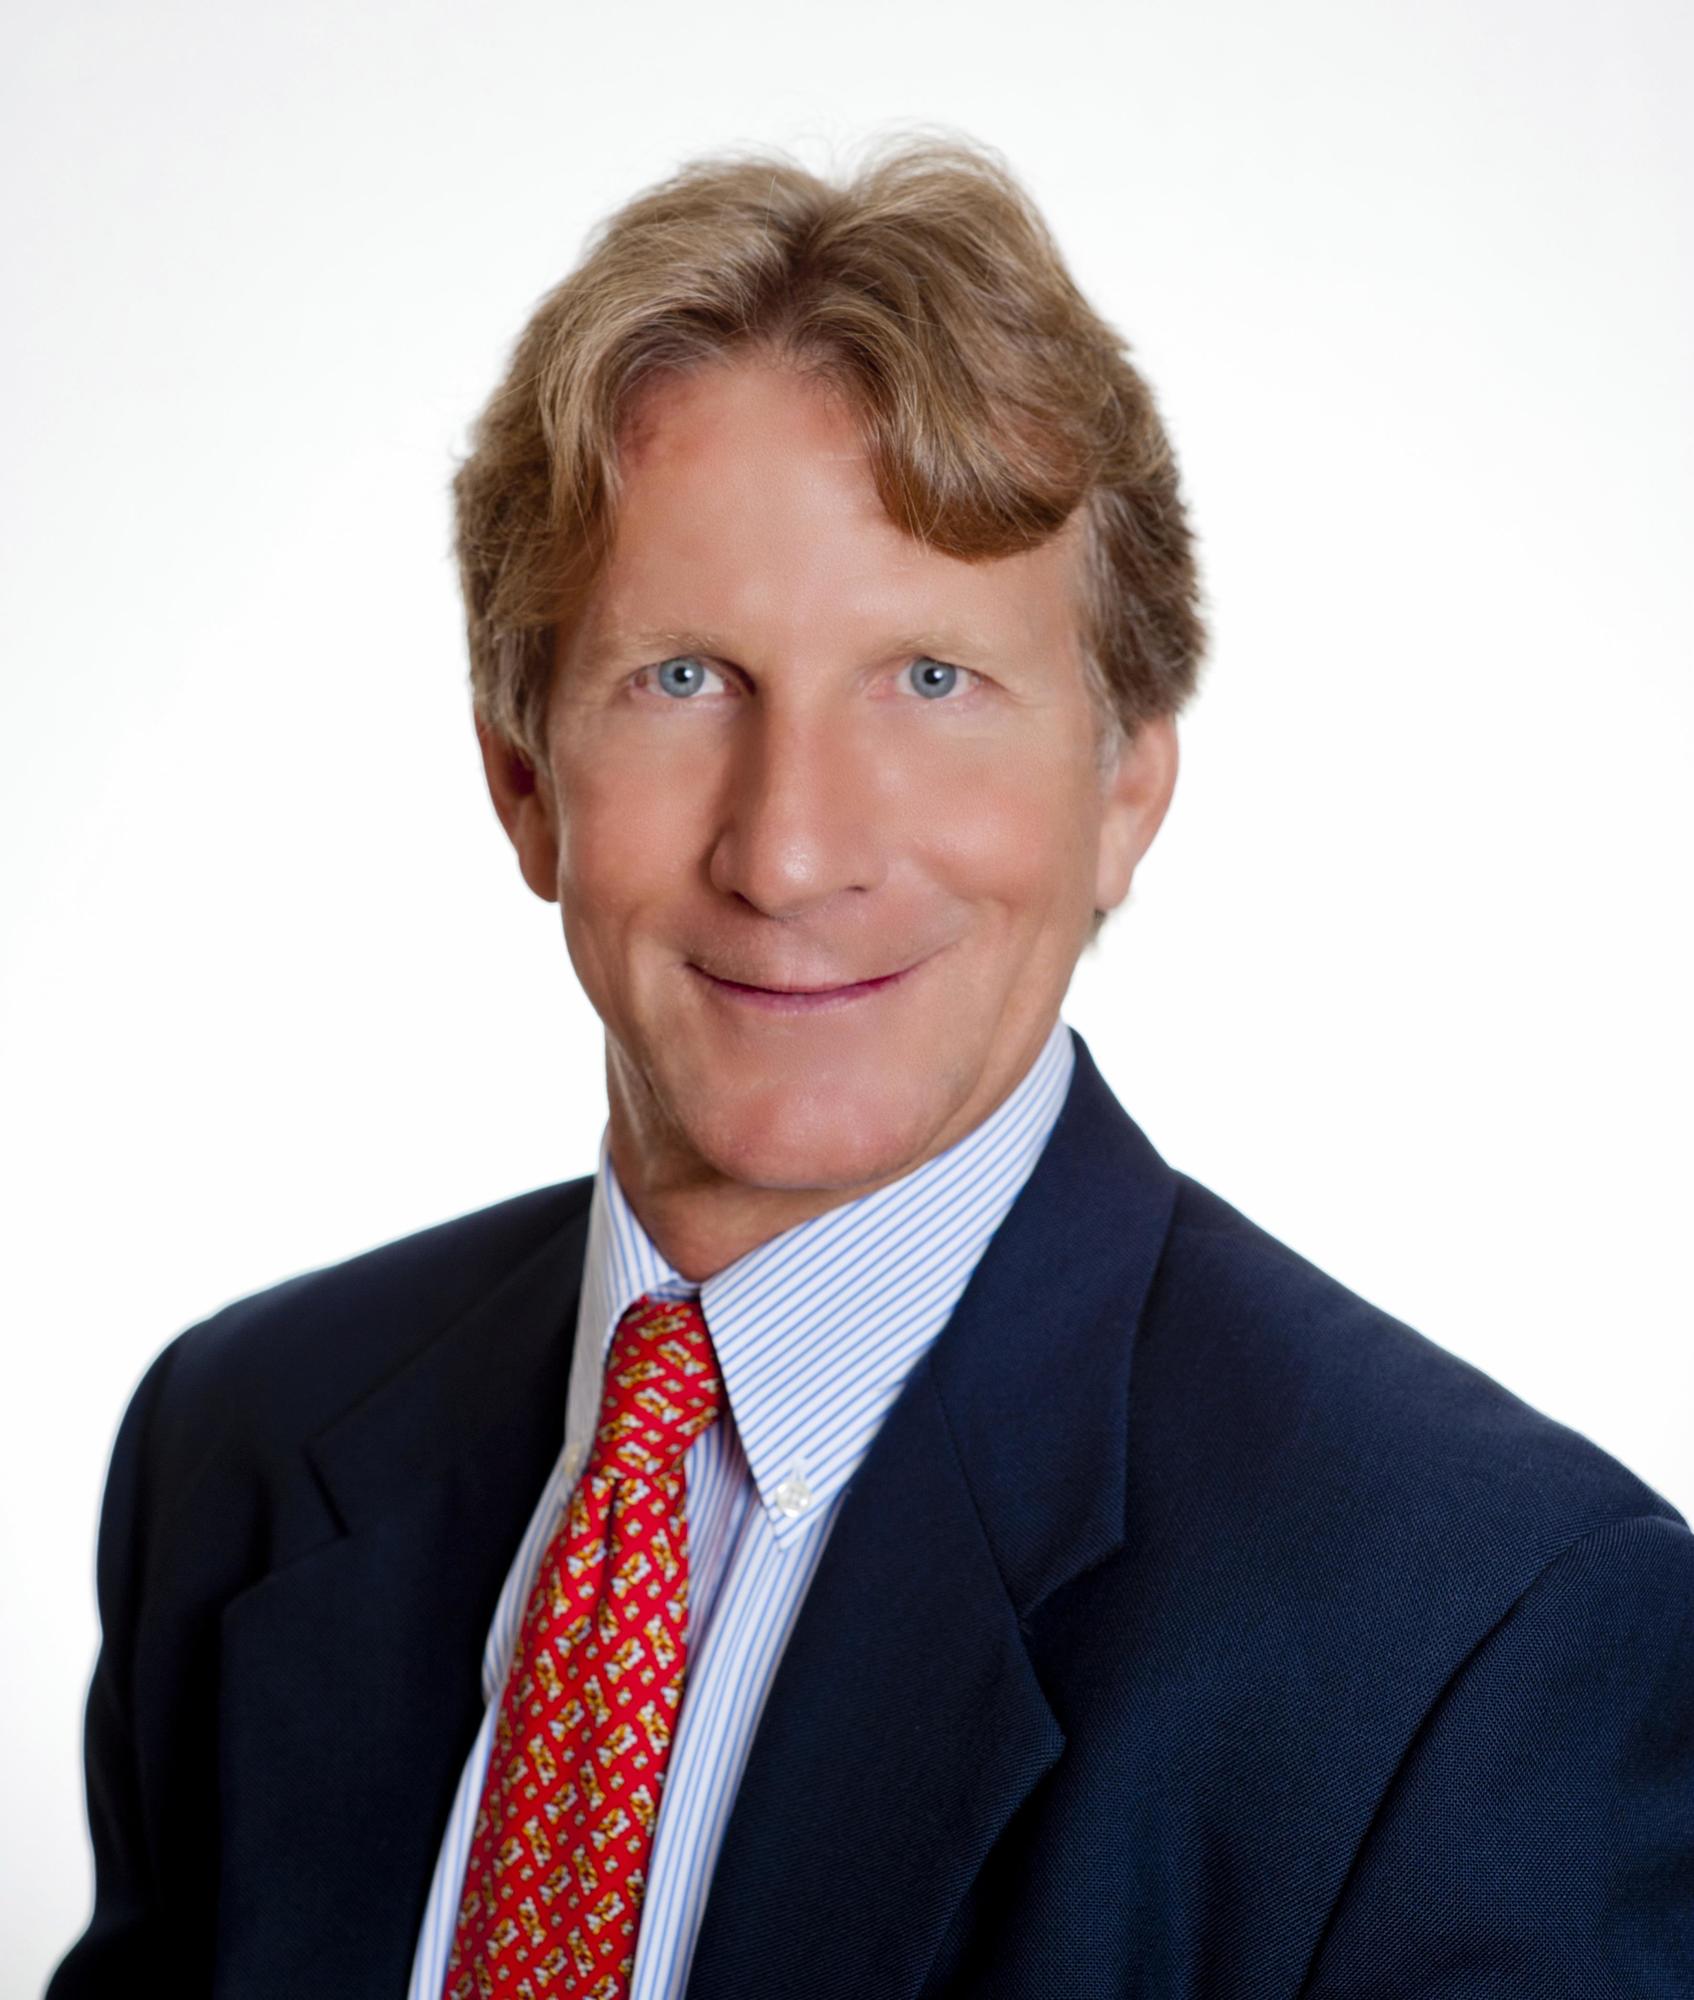 John Harshman is founder and president of Harshman & Co. Inc., a Sarasota commercial real estate brokerage firm